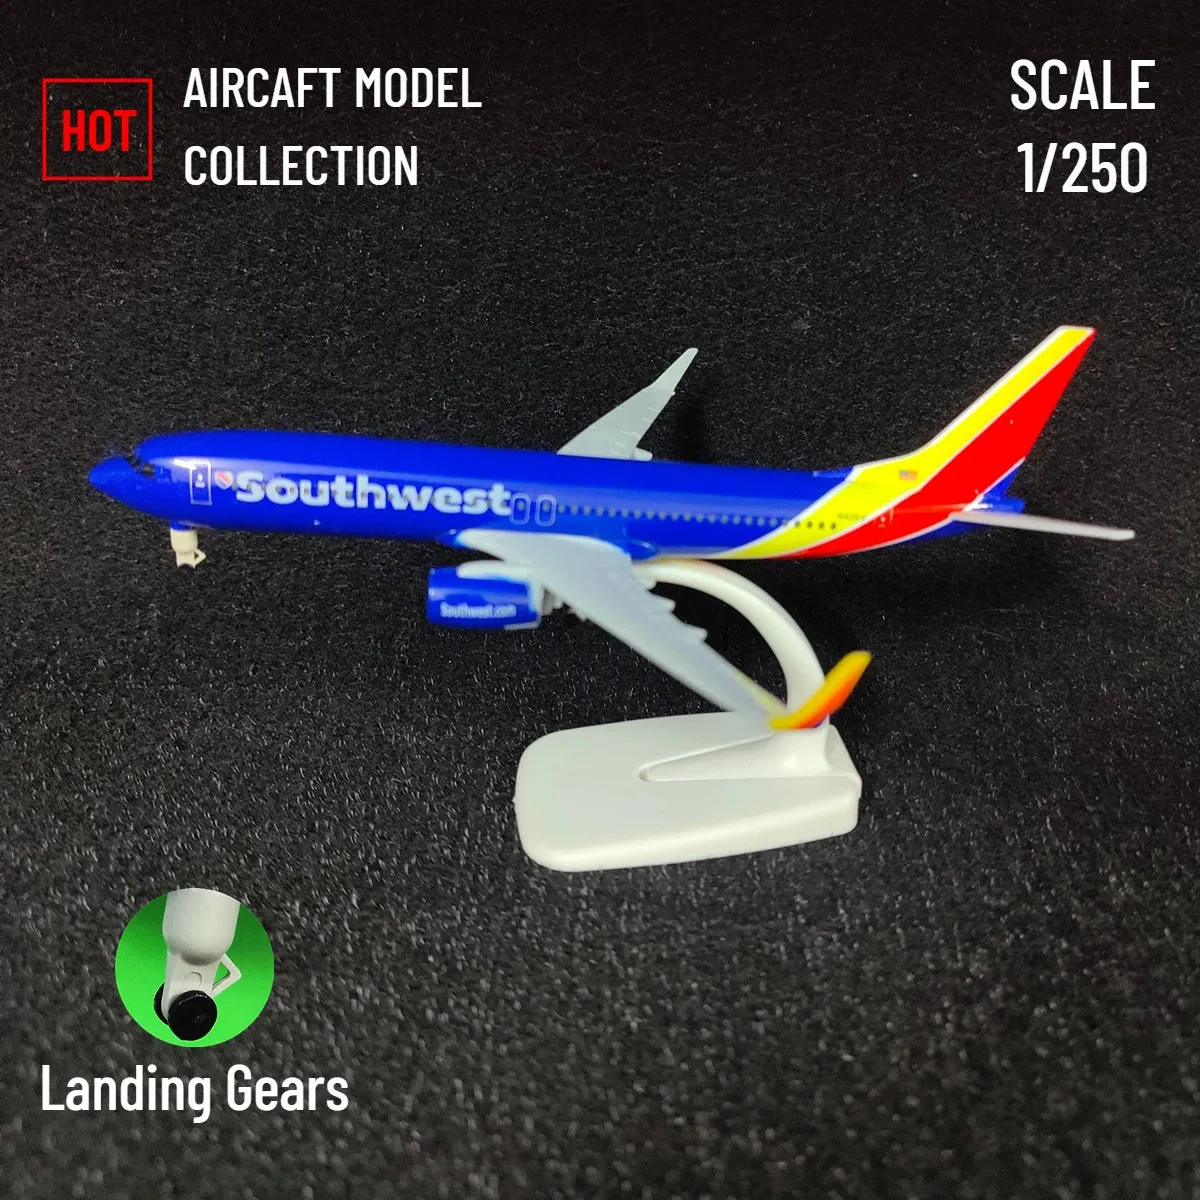 Scale 1 250 Metal Aircraft Model Replica SOUTHWEST Airlines B737 Airplane Aviation Decor Miniature Art Collection Kid Boy Toy 240115